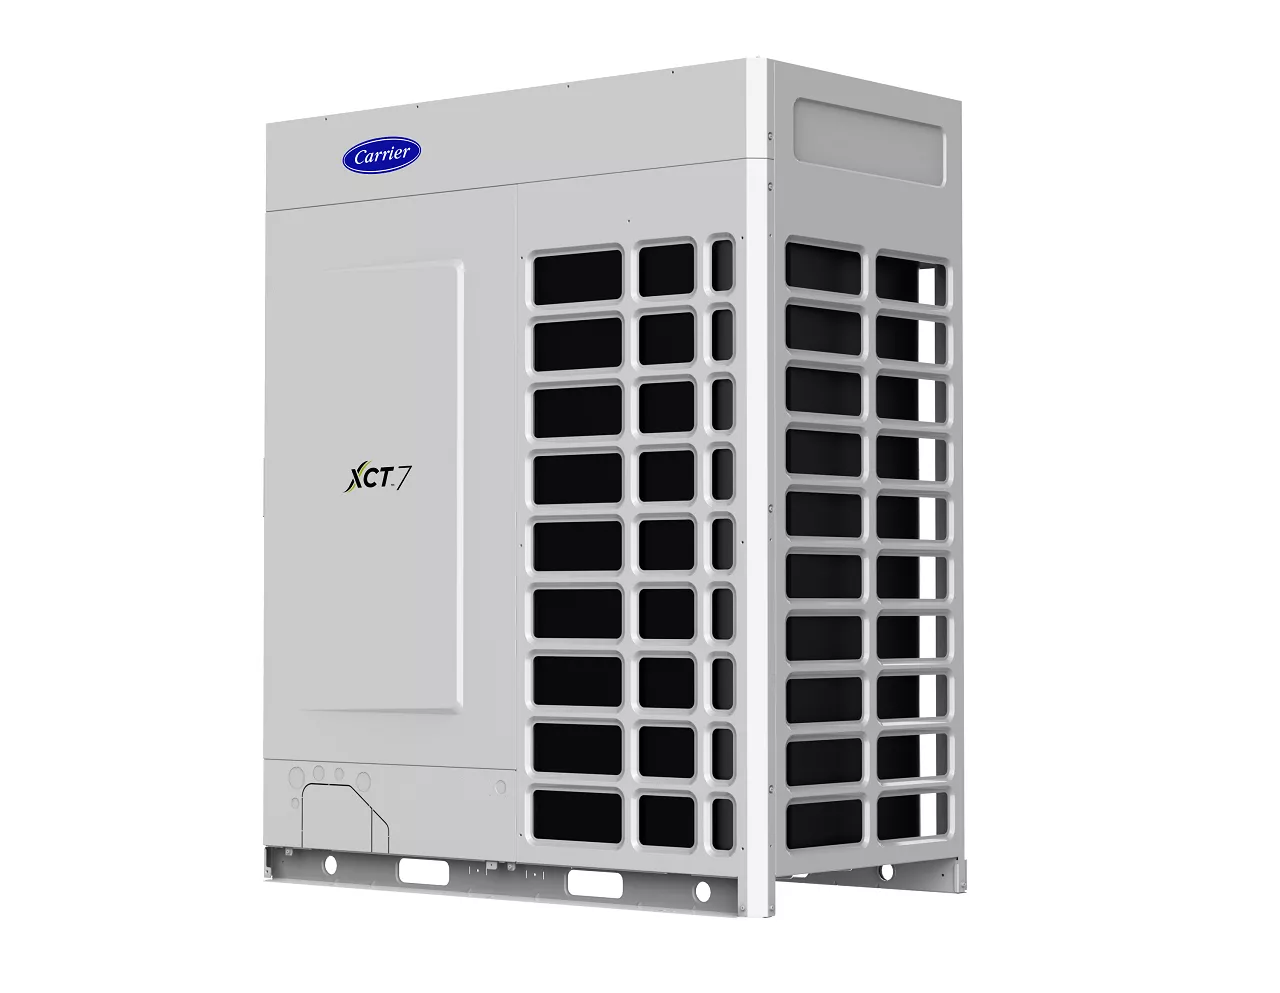 Carrier Introduces its Latest Generation of Variable Refrigerant FlowSystems XCT7